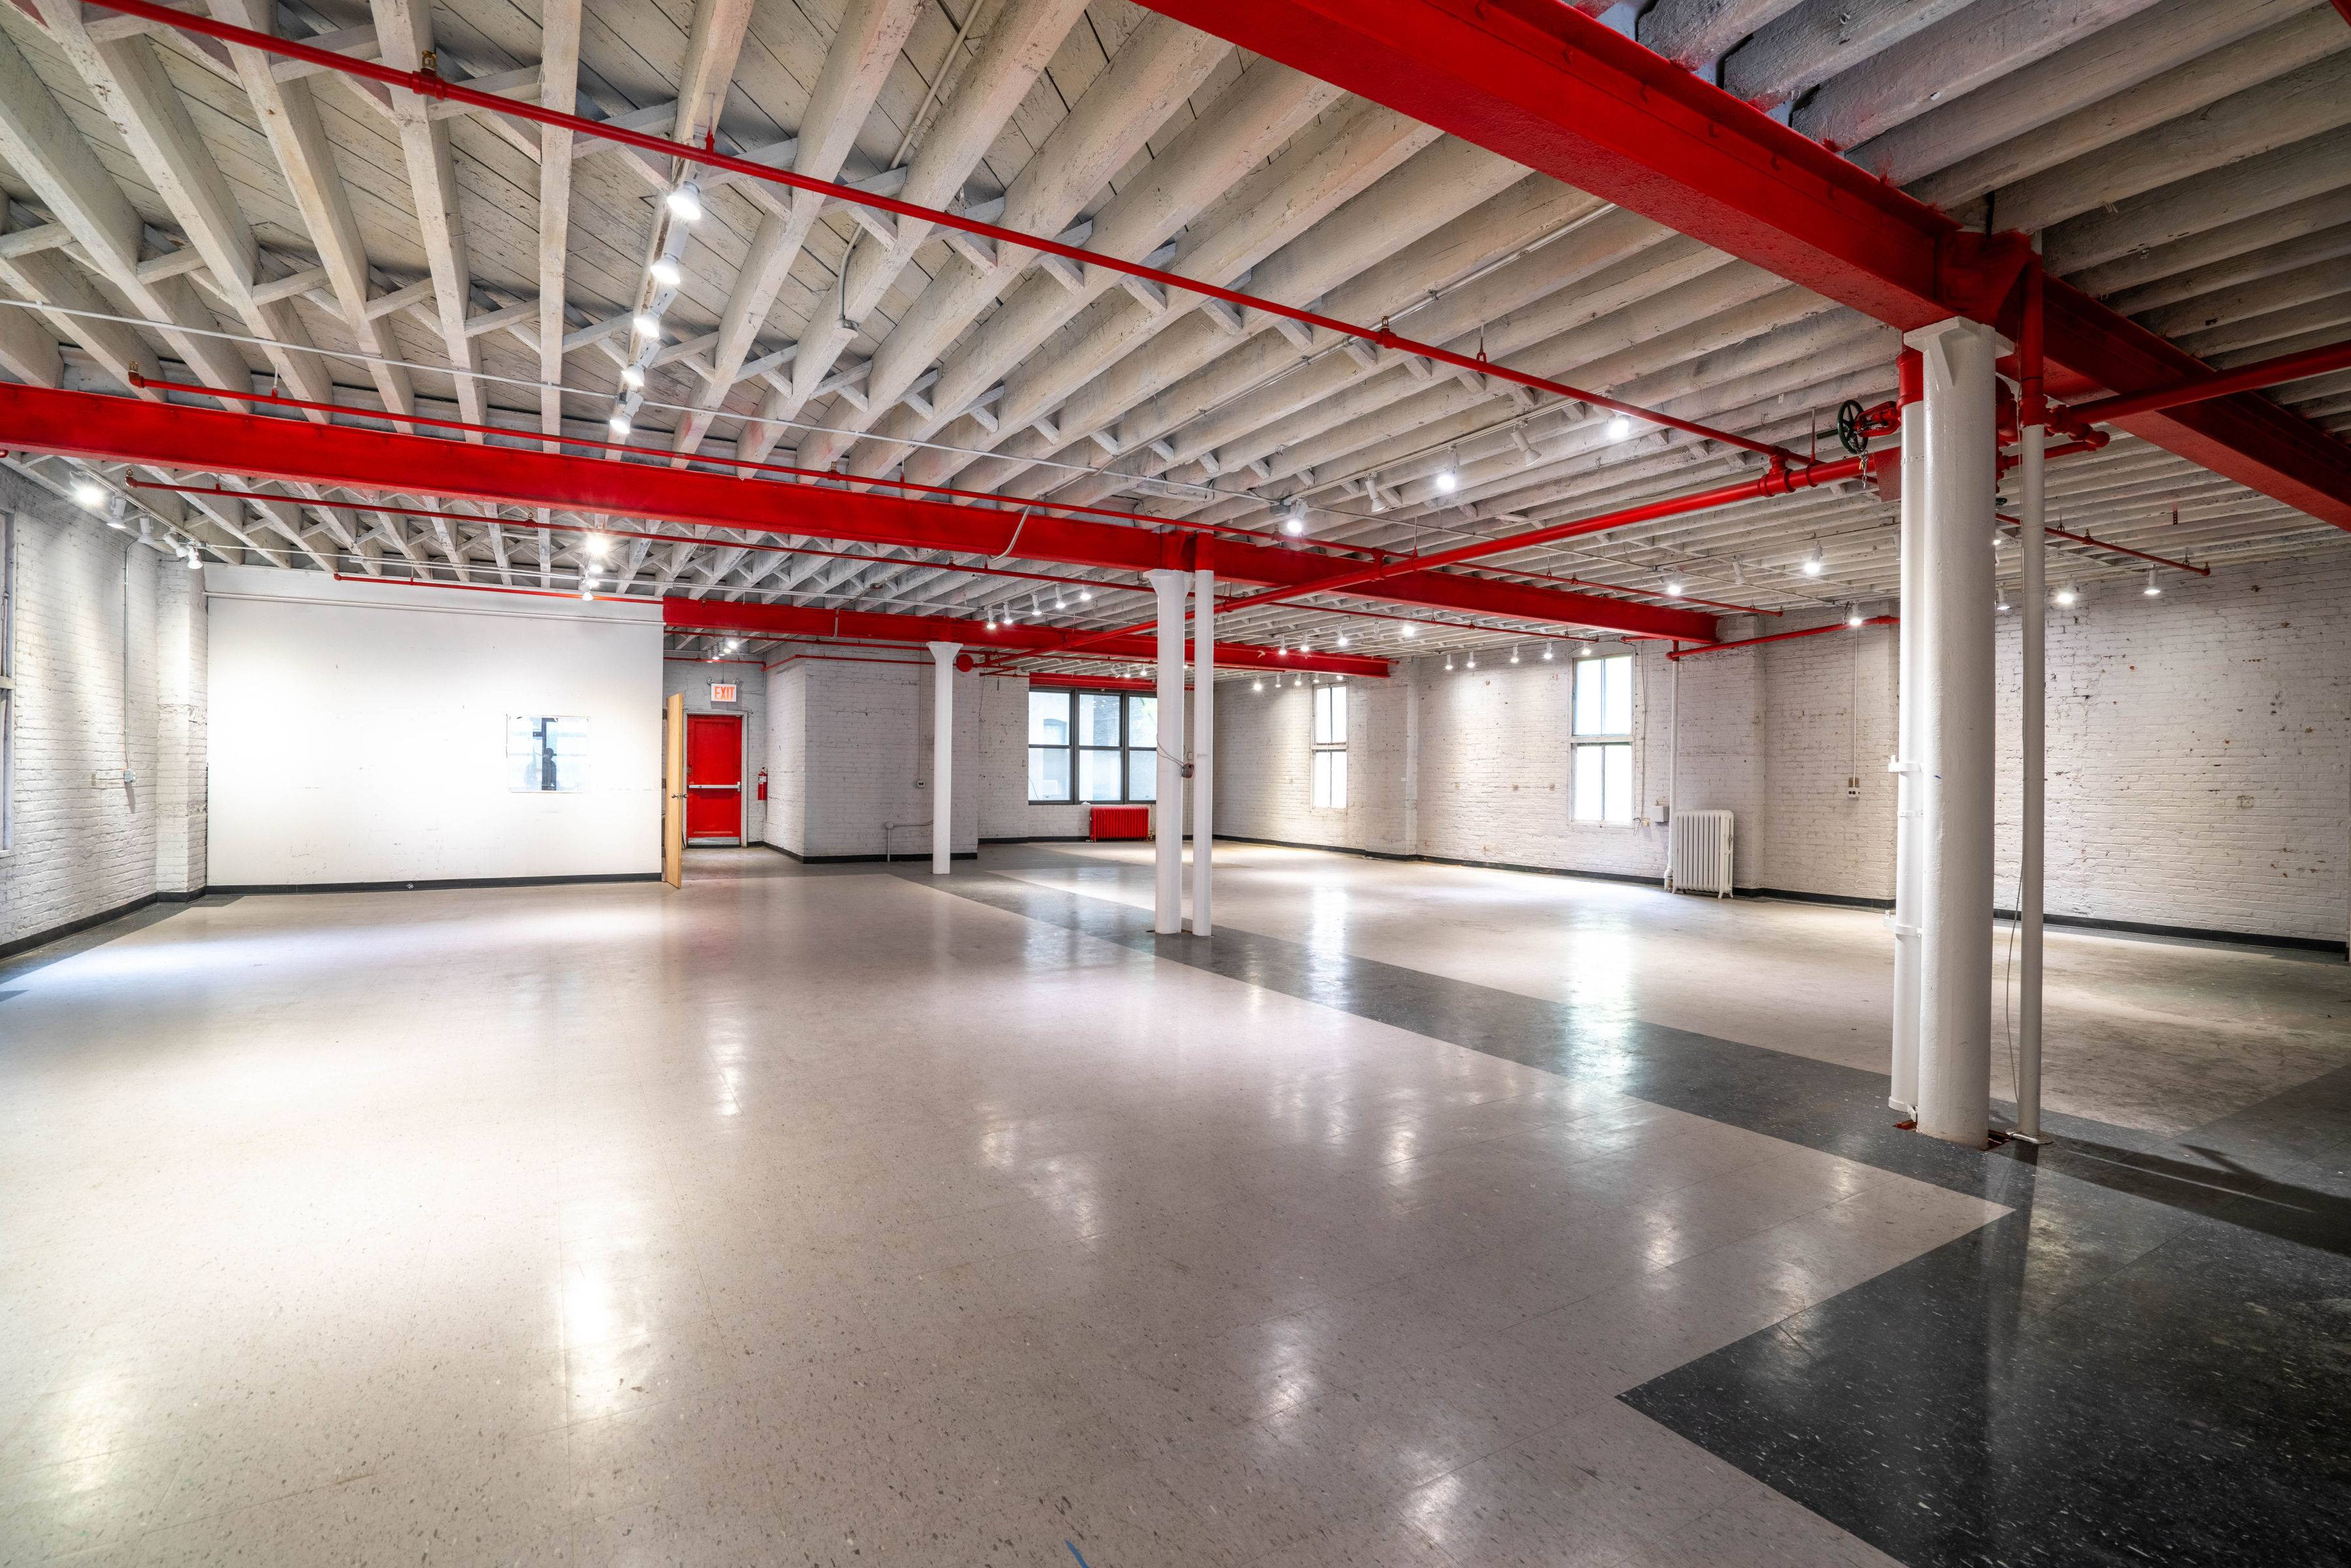 Floor-through 4820 sqft Loft Space with direct freight elevator access